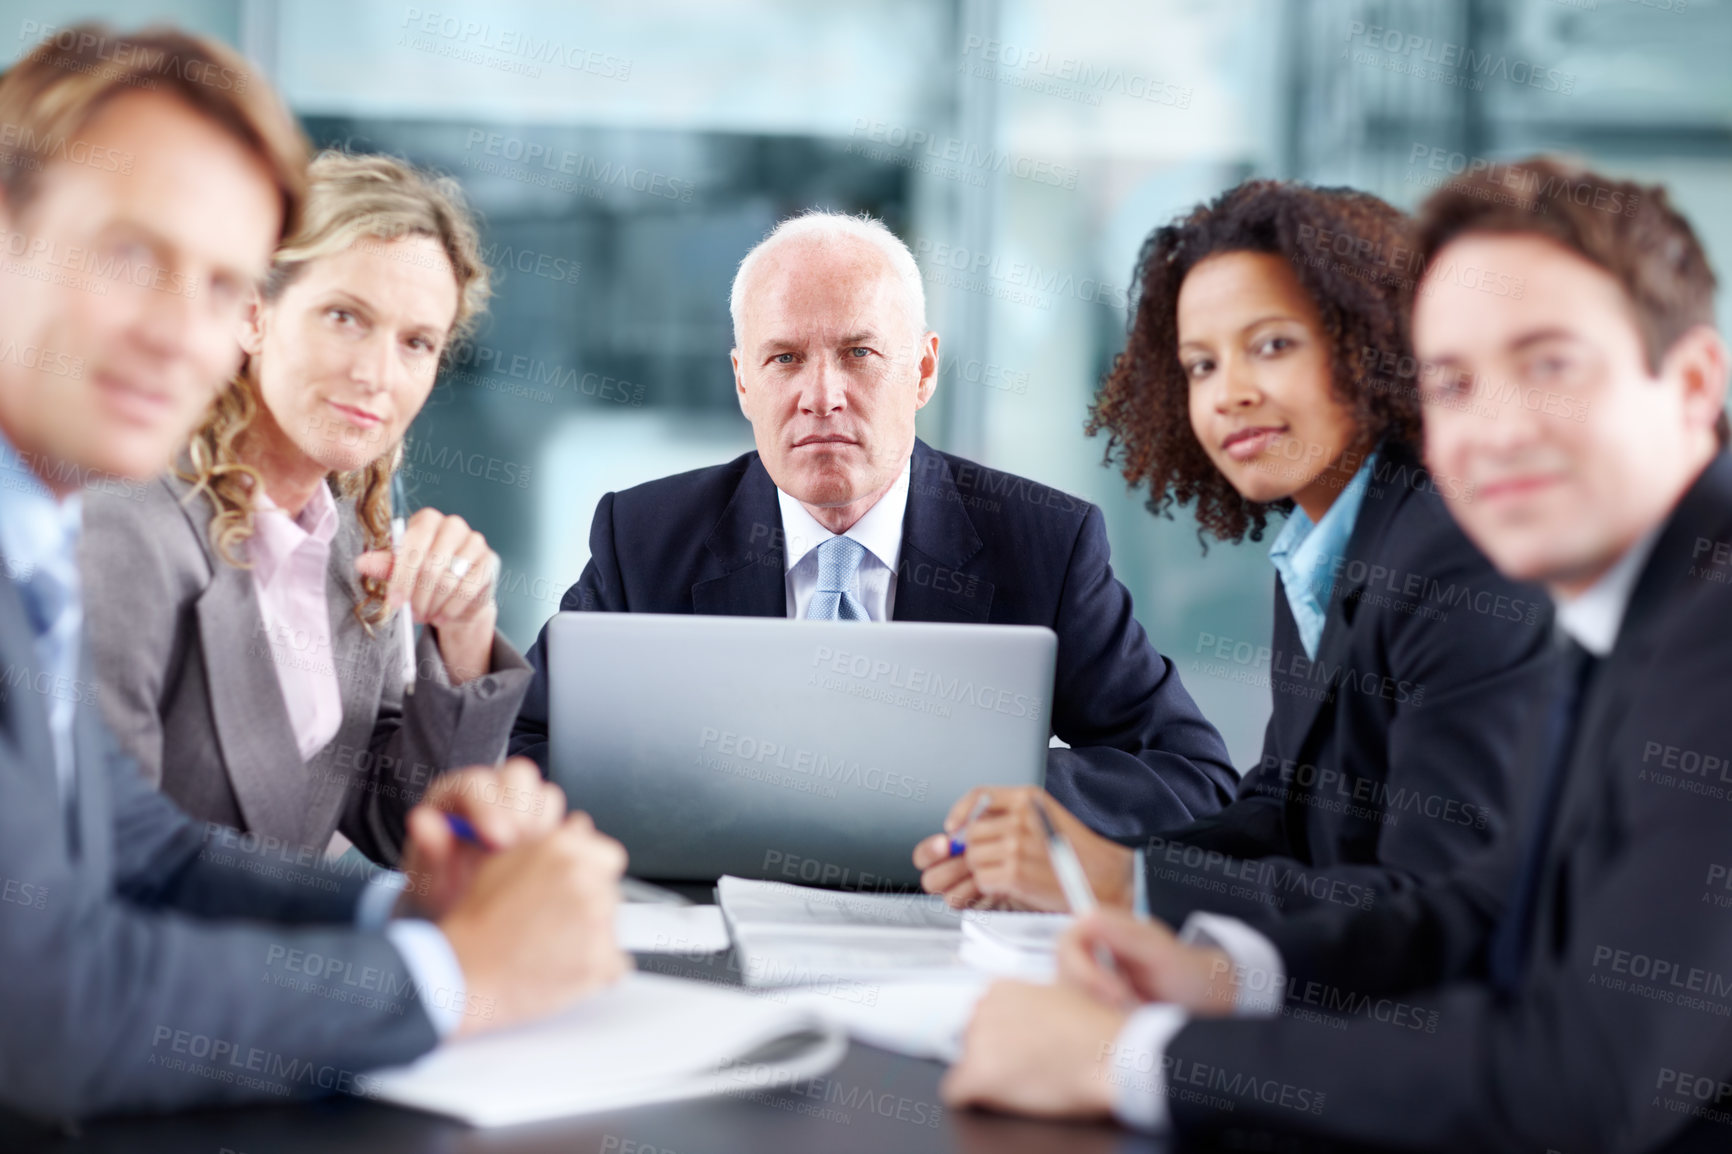 Buy stock photo Business executives sitting at a table during a meeting and using a laptop - portrait